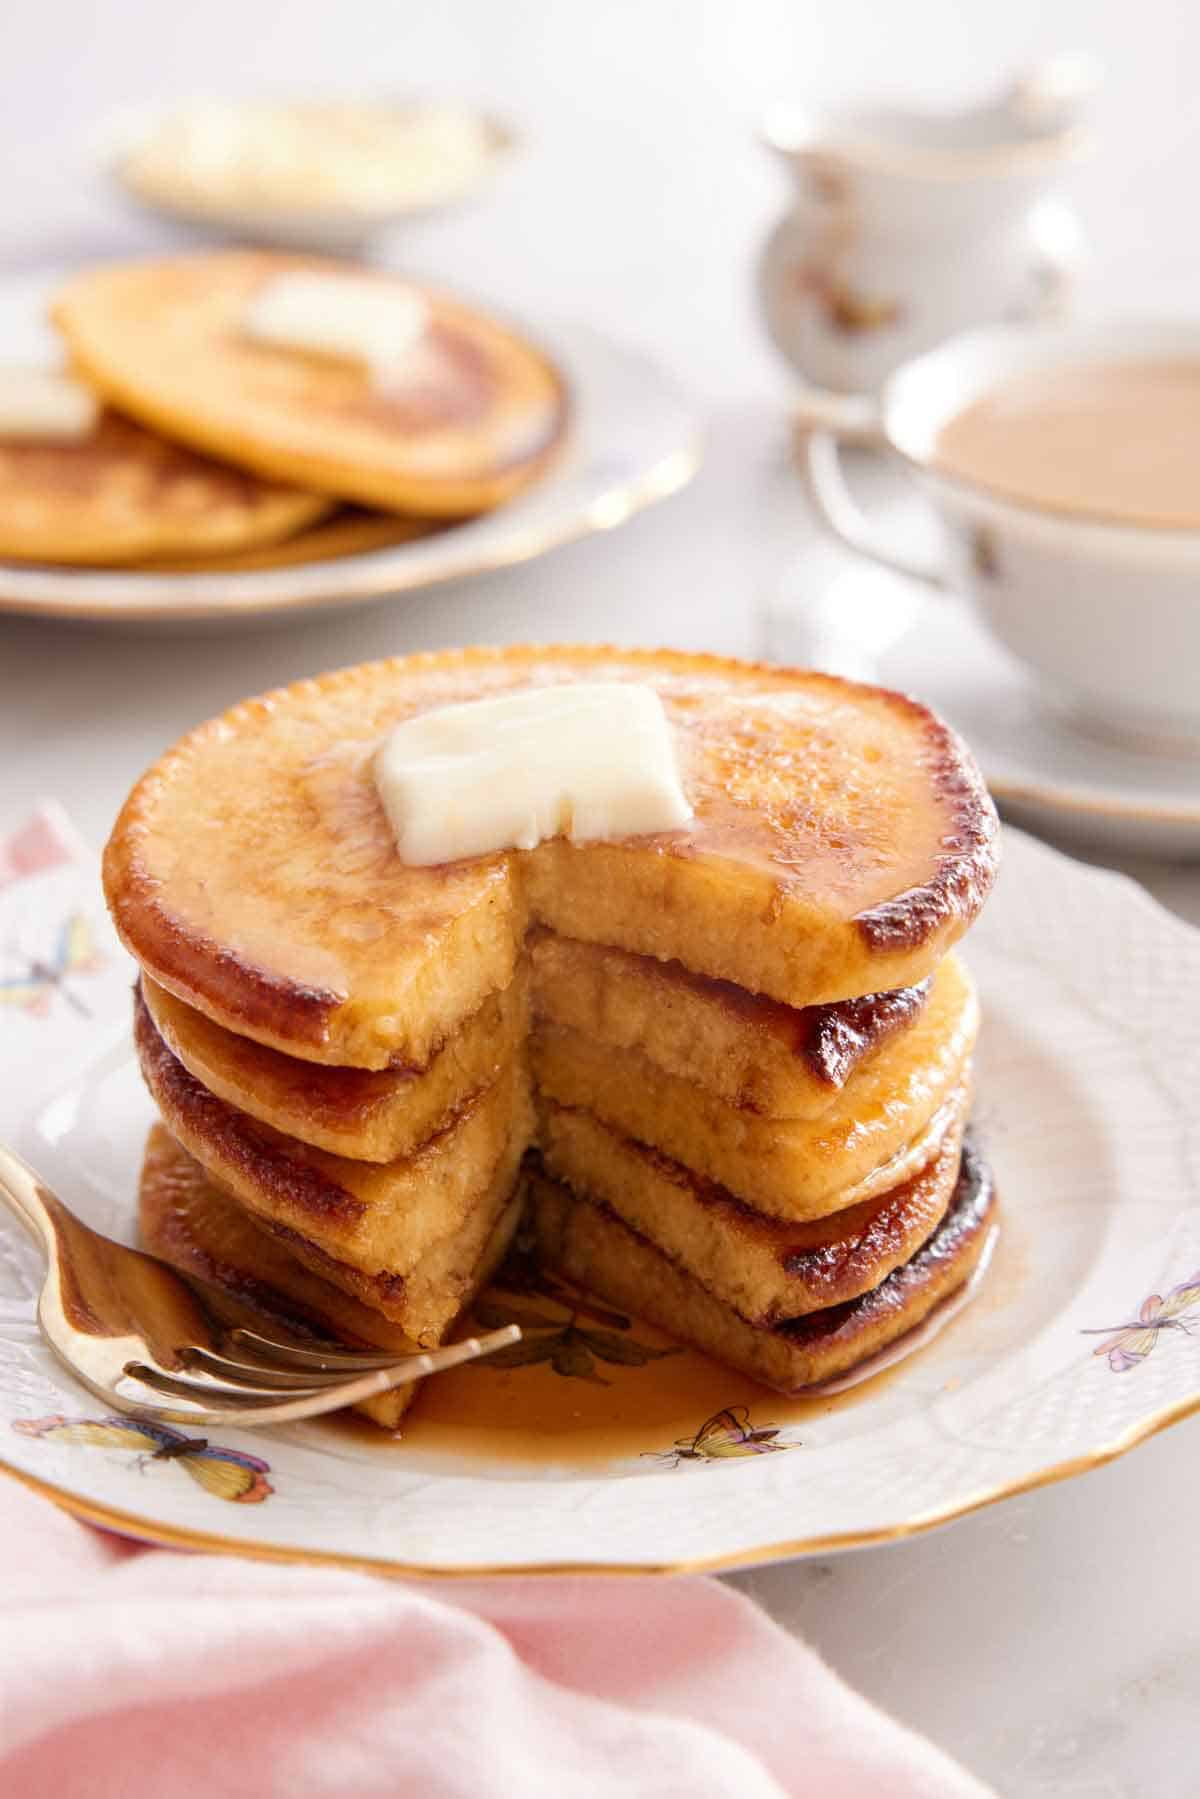 A stack of Johnny cakes with a portion cut out. Butter on top and a fork on the cake.